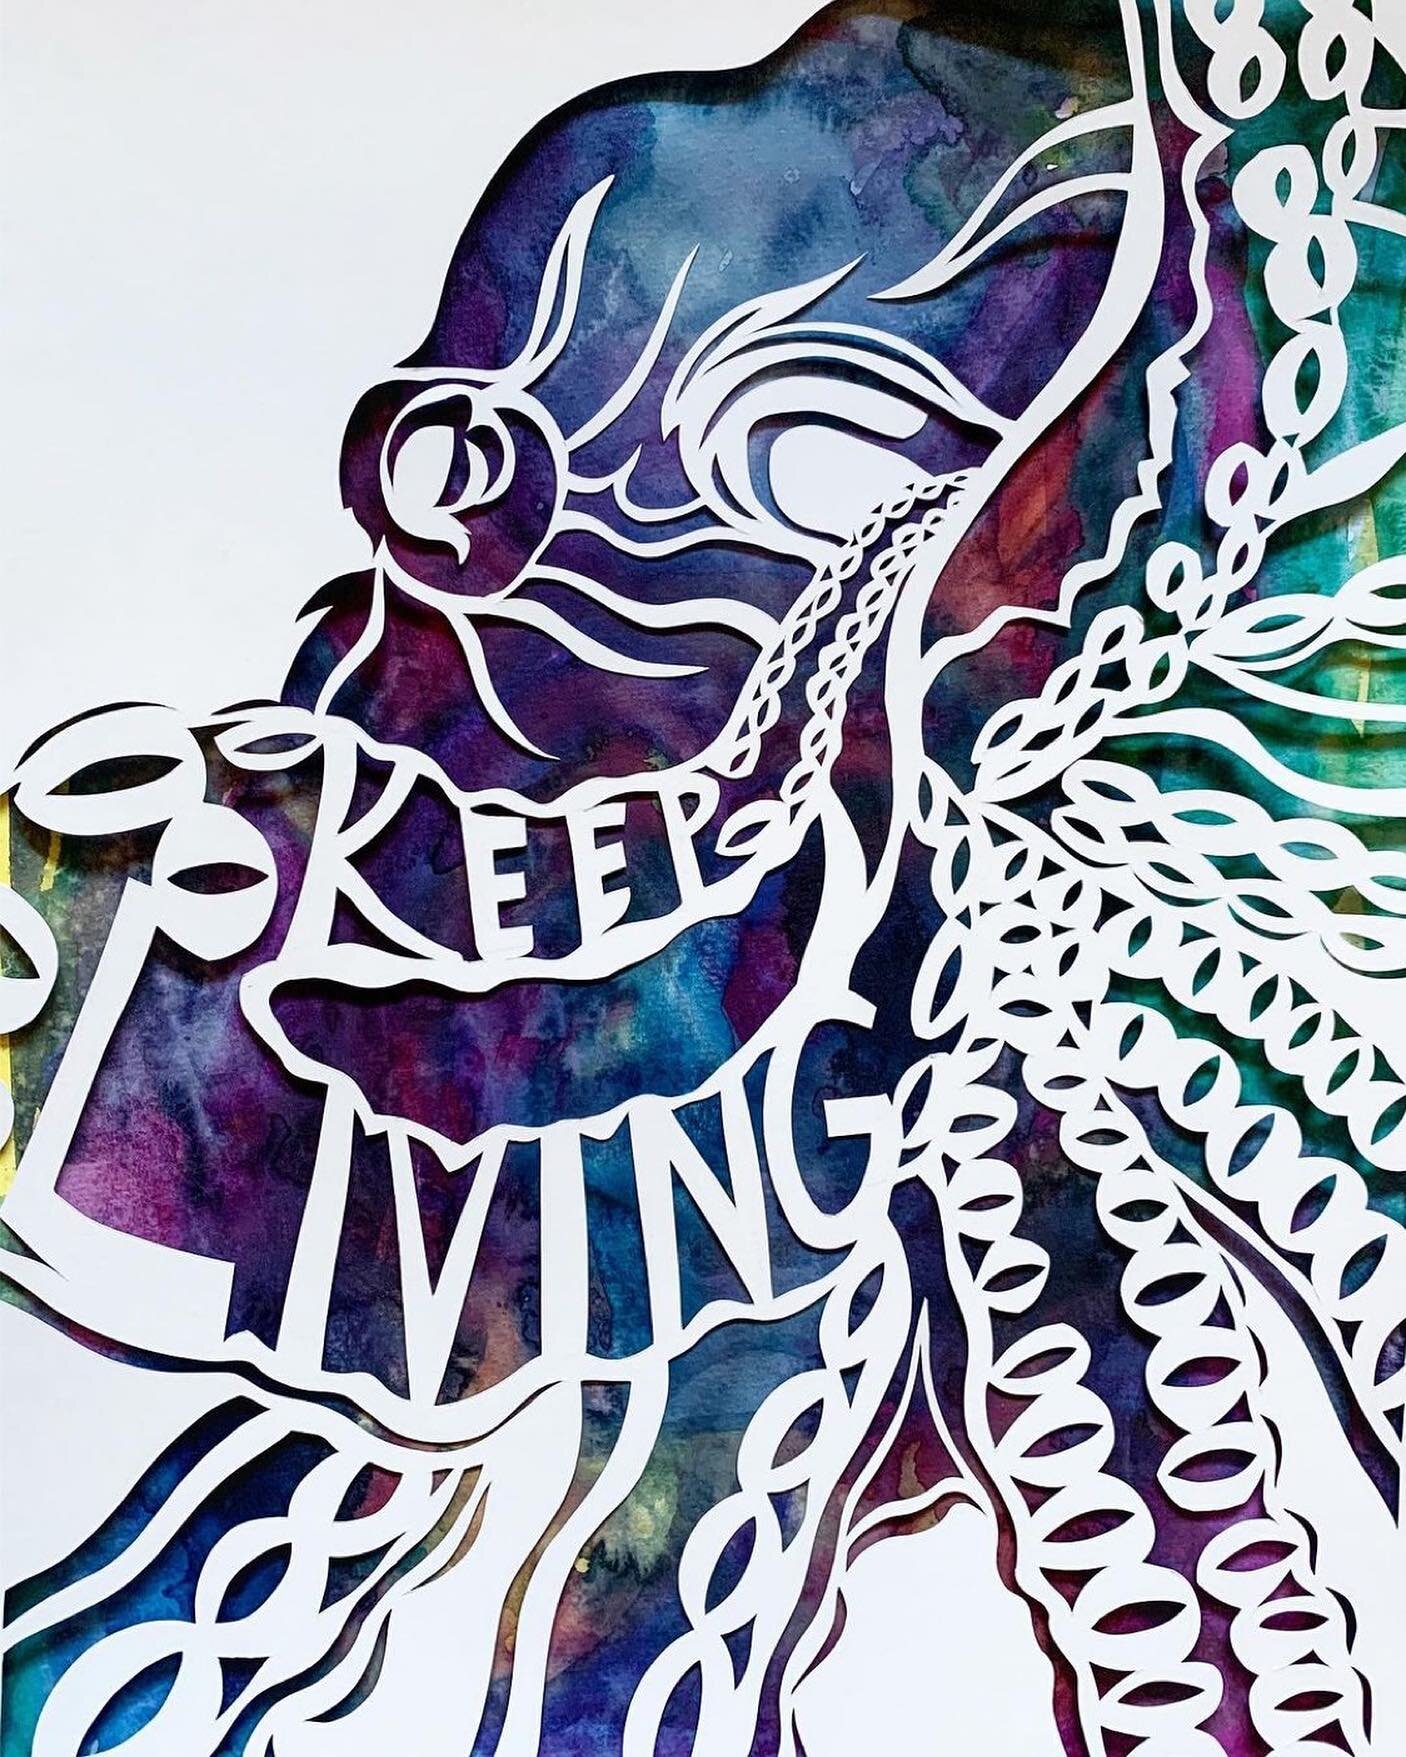 Featured Follower: Jordan Merlino @jmerlino_cutpaper. Jordan is a paper-cut artist who creates posters for suicide prevention and brings awareness to mental health issues through their art. They are currently studying to be a crisis counselor. Connec